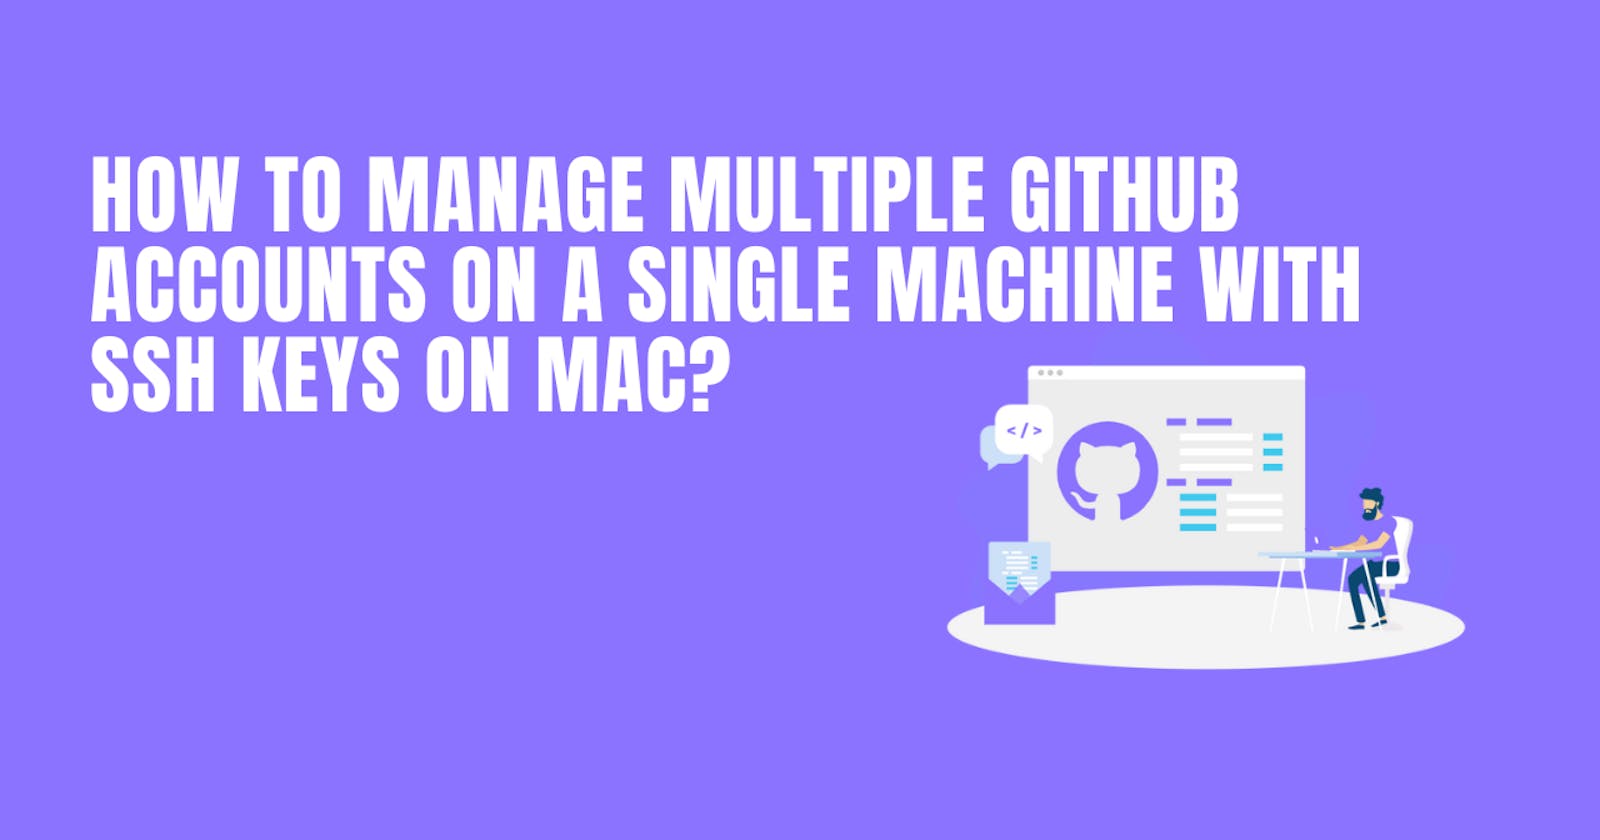 How to manage multiple GitHub accounts on a single machine with SSH keys on Mac?